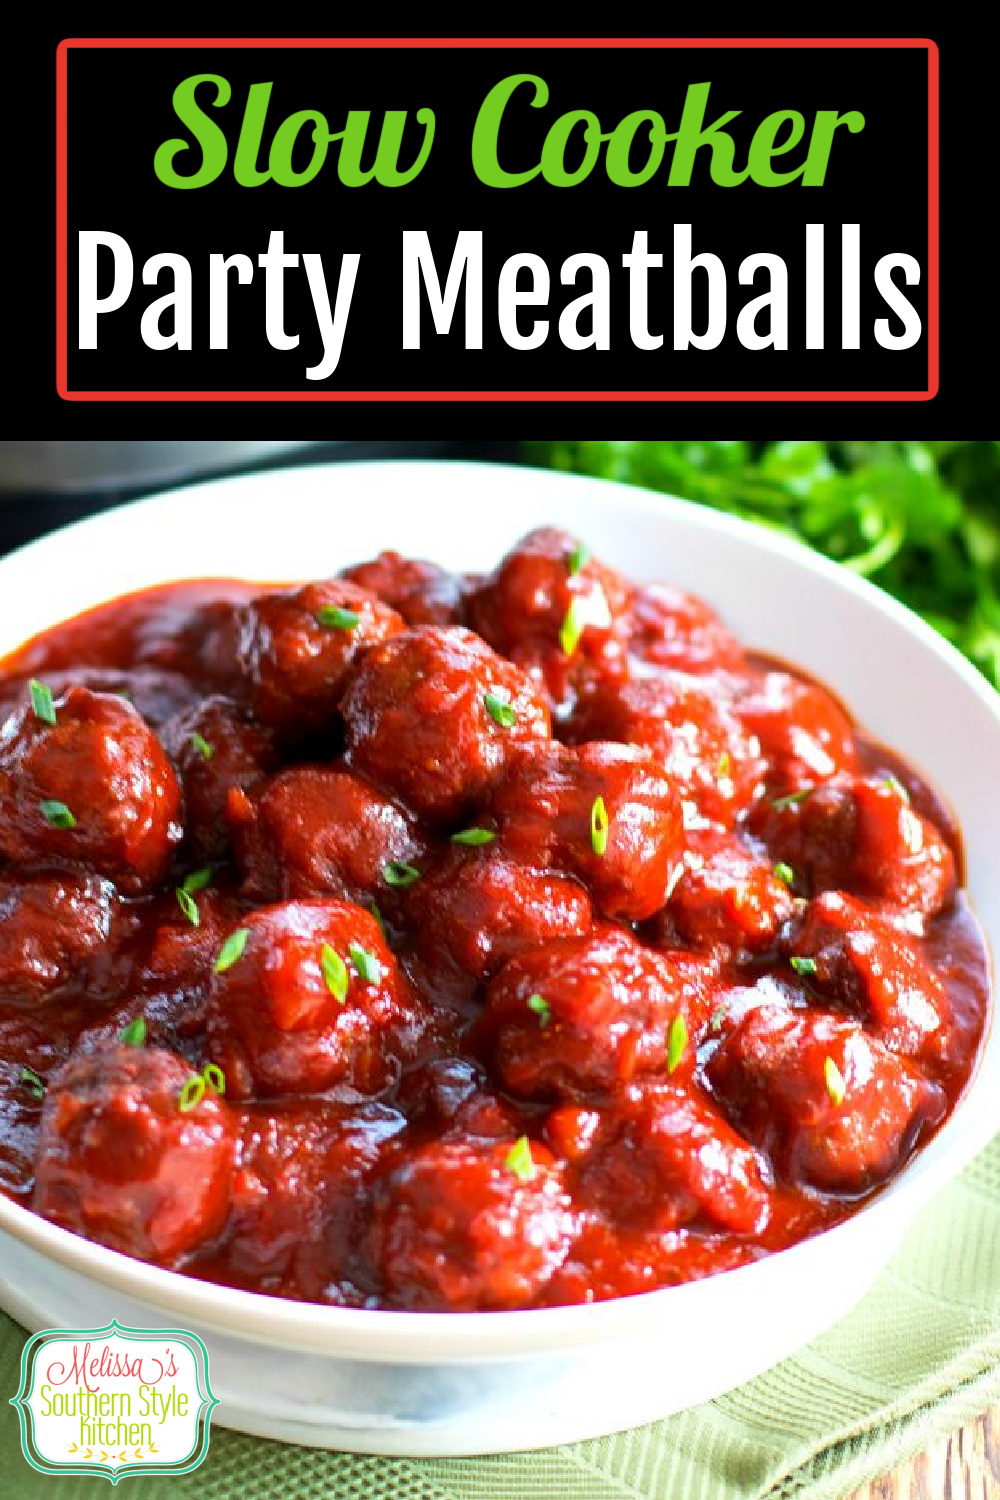 Make these Slow Cooker Party Meatballs and let your crockpot do the work #meatballs #partyfood #appetizers #partymeatballs #easygroundbeefrecipes #sweetandsour #sweetandspicy #beef #slowcookerrecipes #crockpotmeatballs #crockpotrecipes via @melissasssk